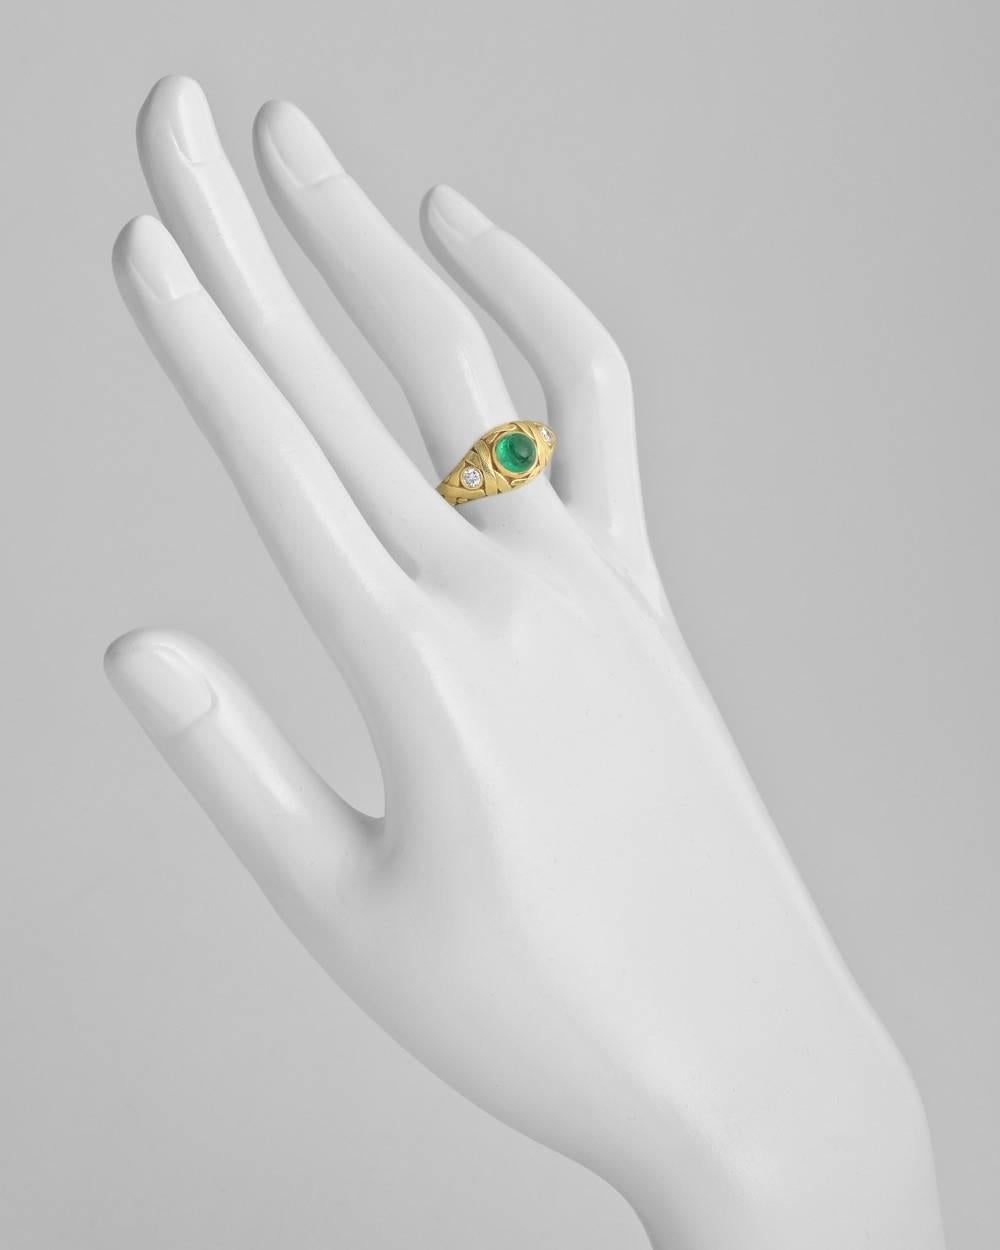 Dress ring, centering a circular cabochon-cut emerald measuring approximately 6mm in diameter in a hand-engraved 18k yellow gold 'X' weave-patterned mounting with a single round-cut diamond accent at either shoulder, signed Alex Sepkus. Size 6.25.
